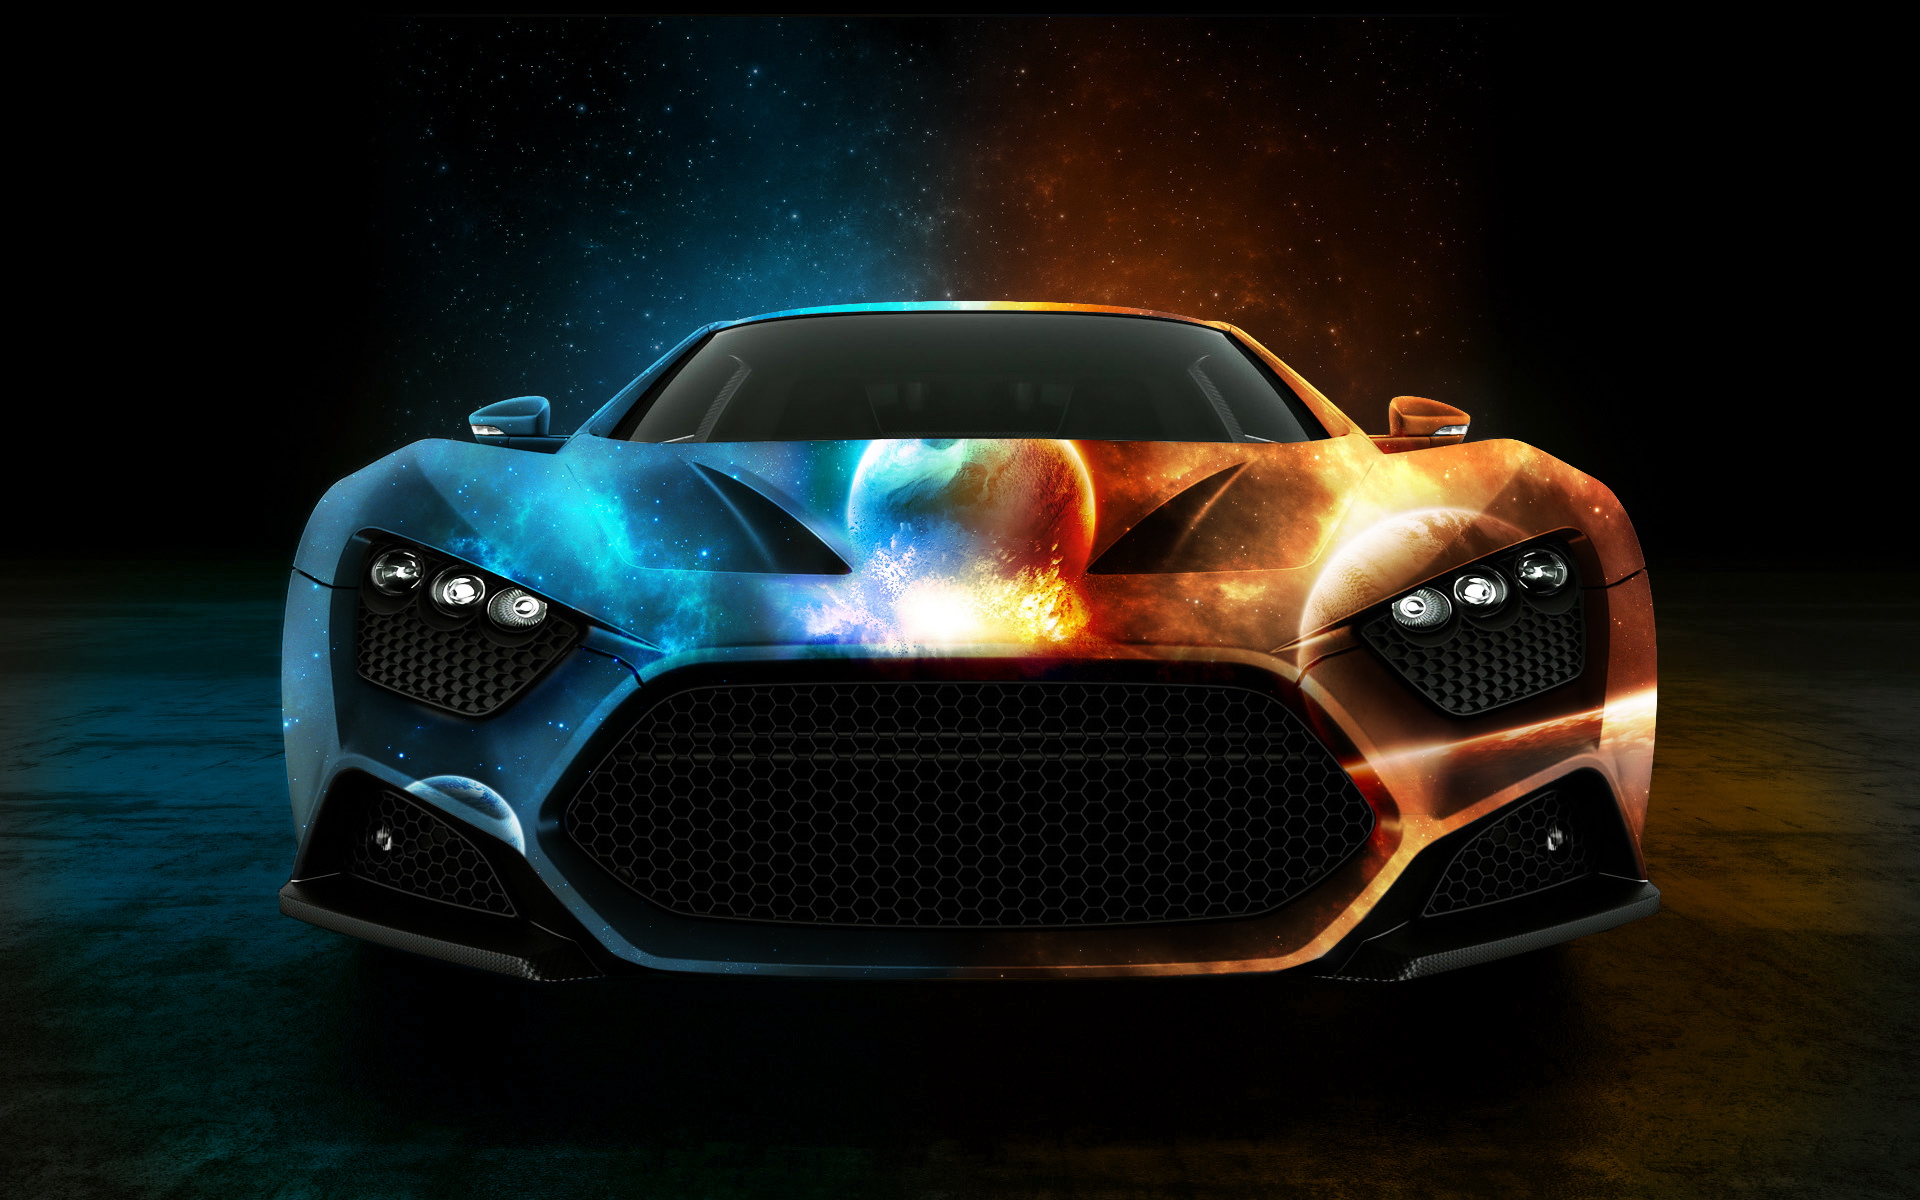 Cool car background images | danaspeh.top